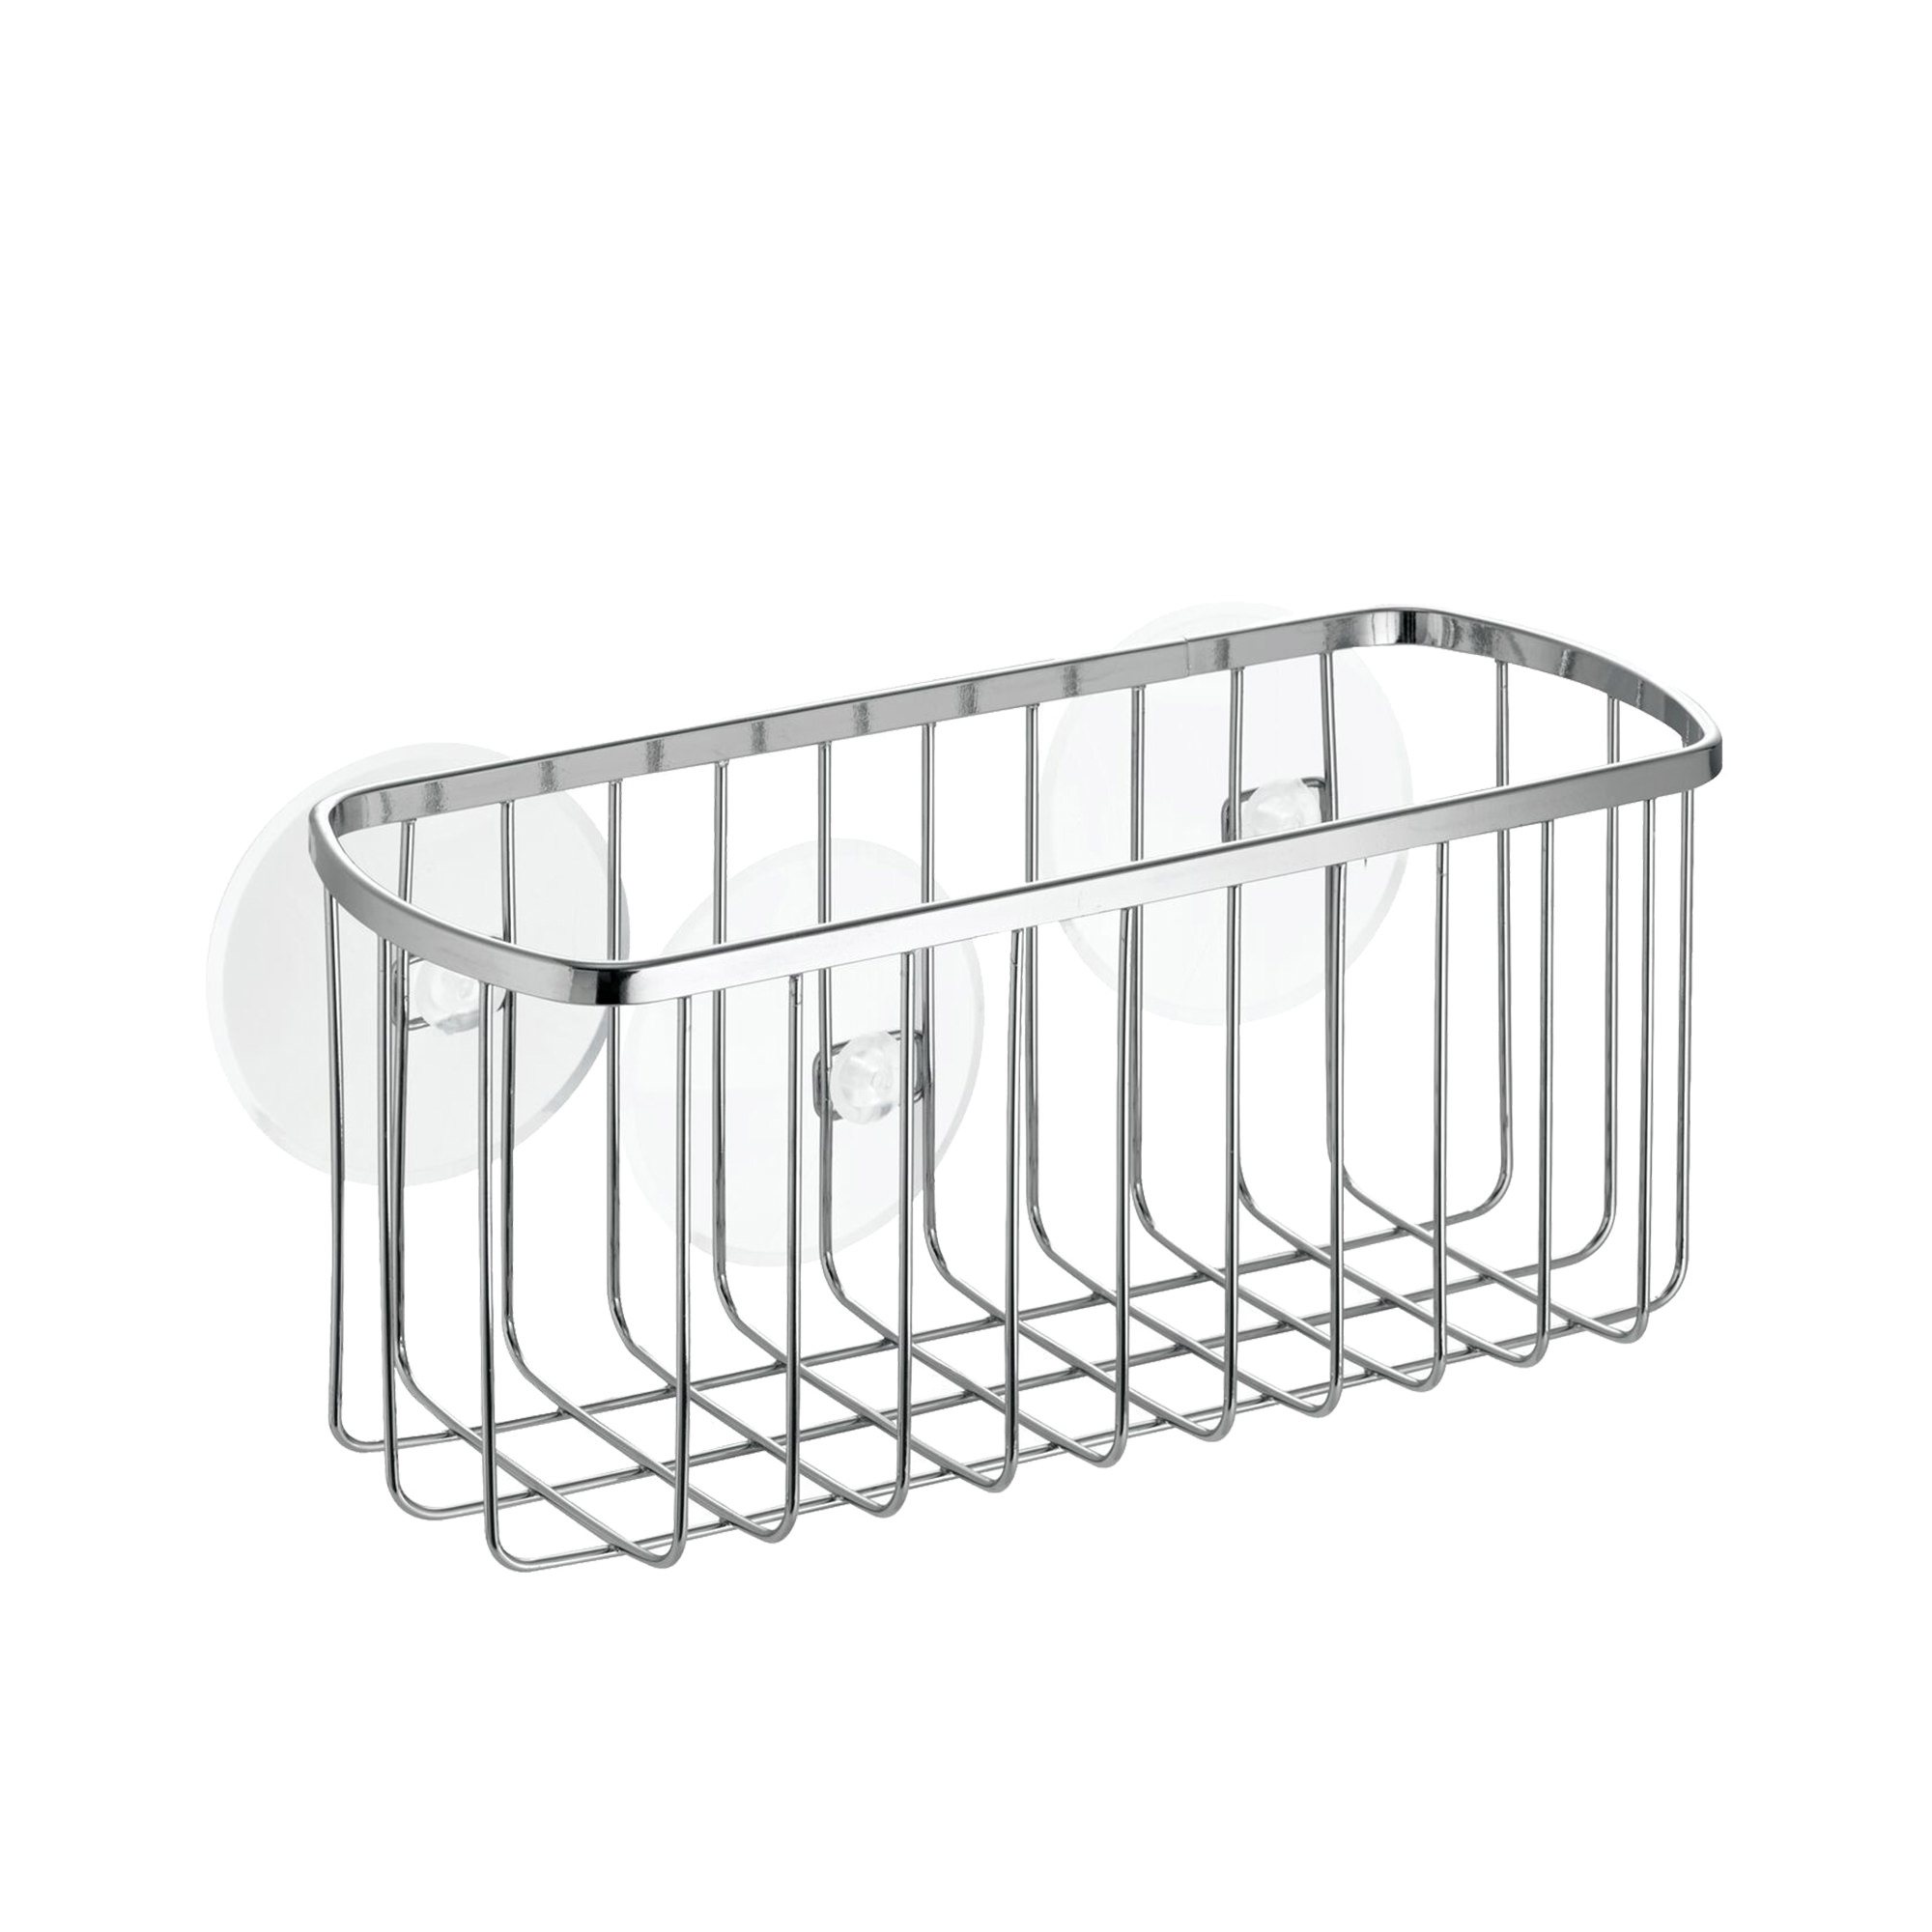 iDesign Stainless Suction Basket Silver Image 1